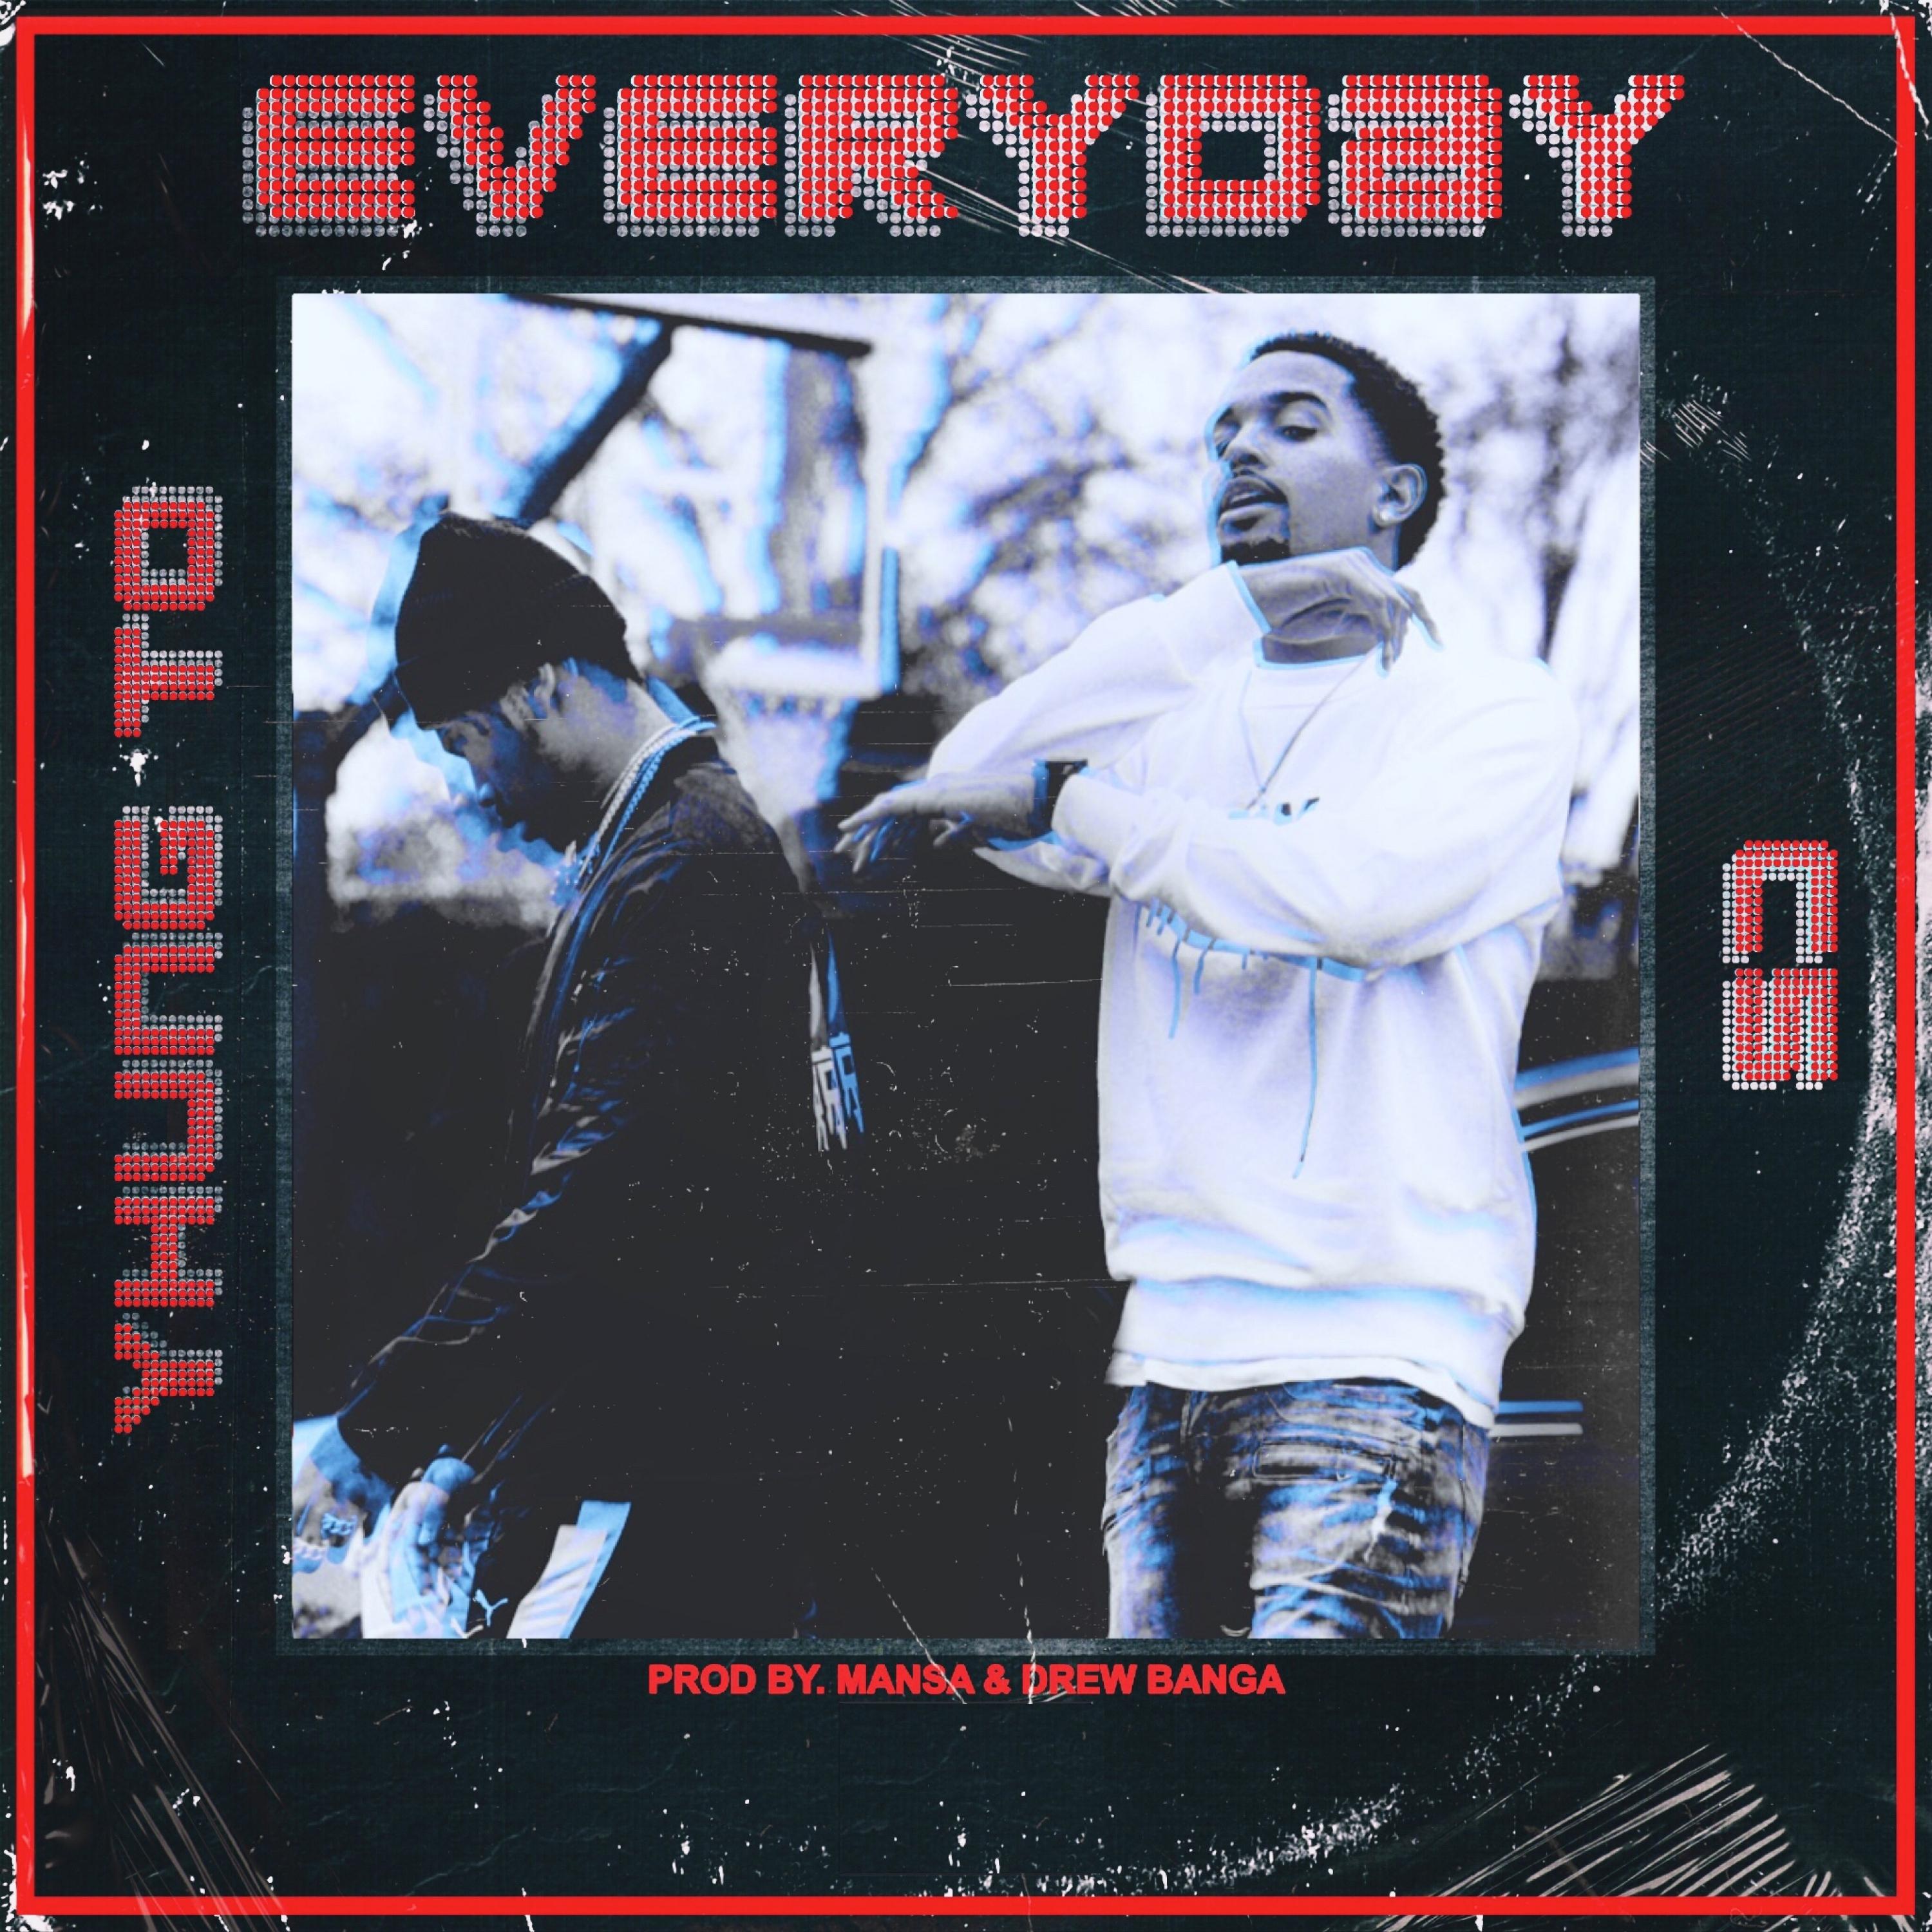 Everyday (feat. Yhung T.O.)